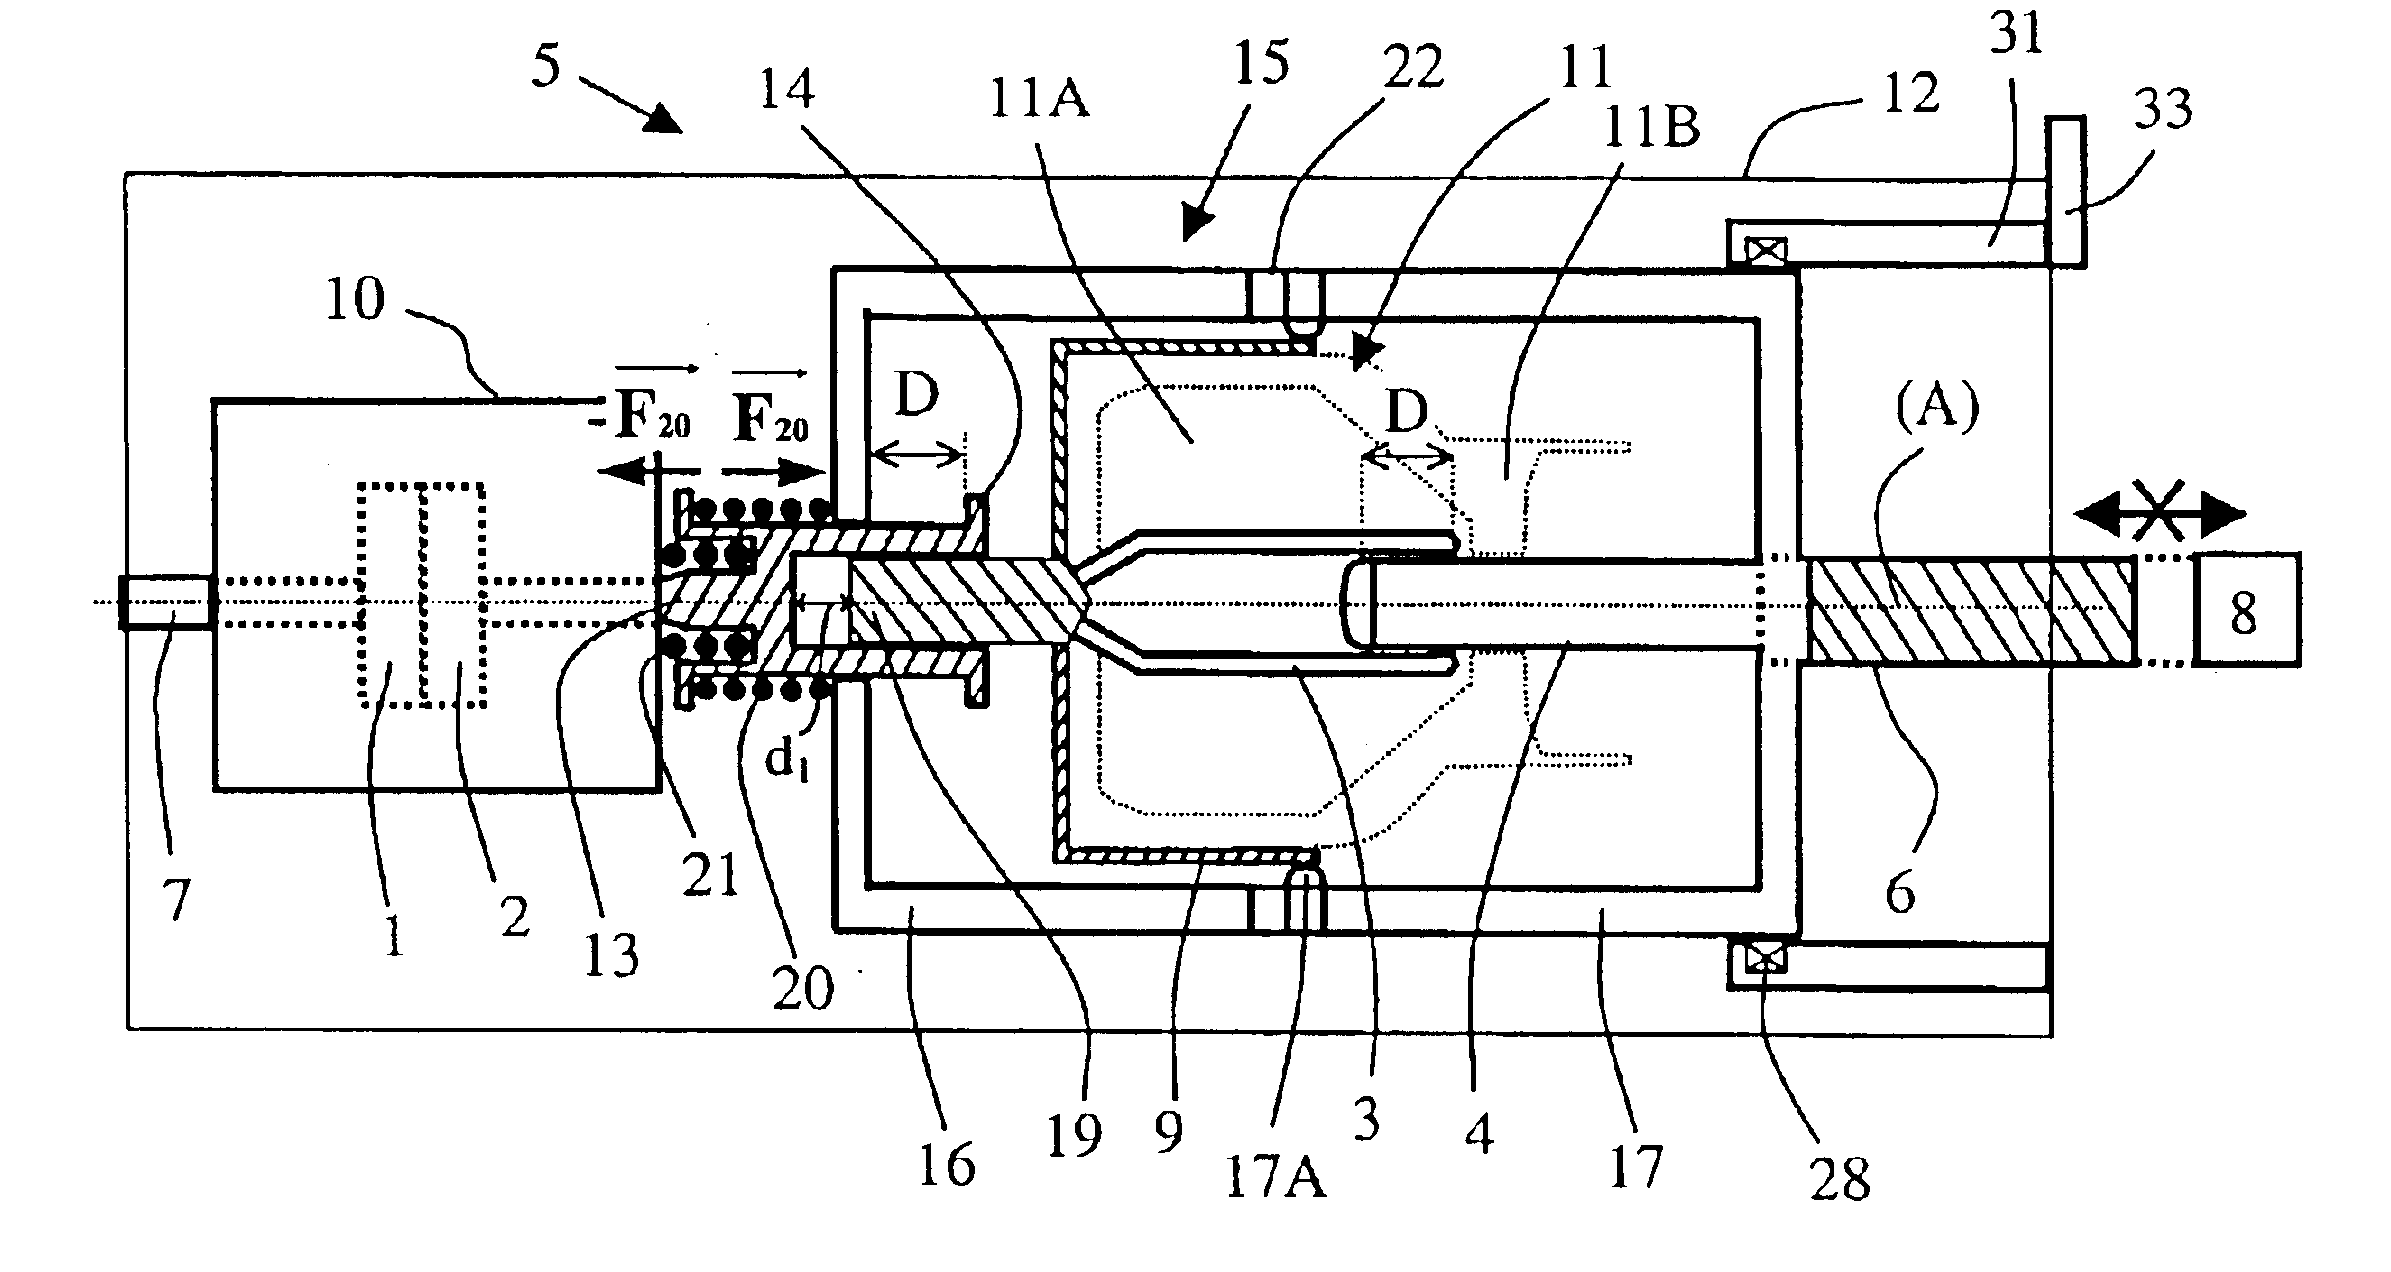 High-voltage or medium-voltage switch device with combined vacuum and gas breaking